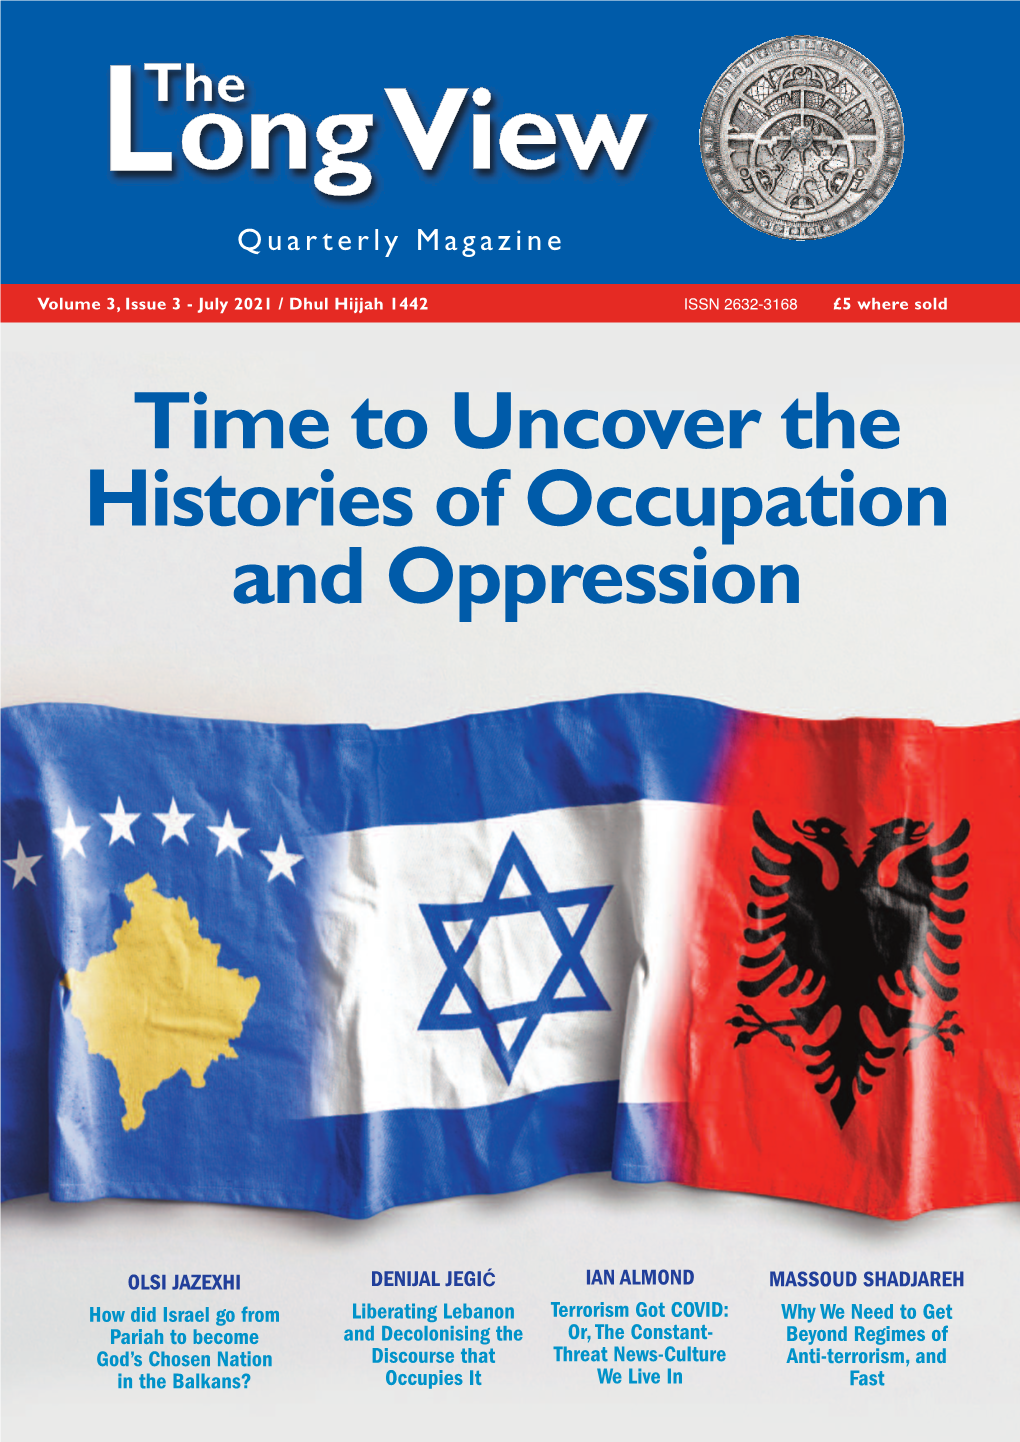 Time to Uncover the Histories of Occupation and Oppression